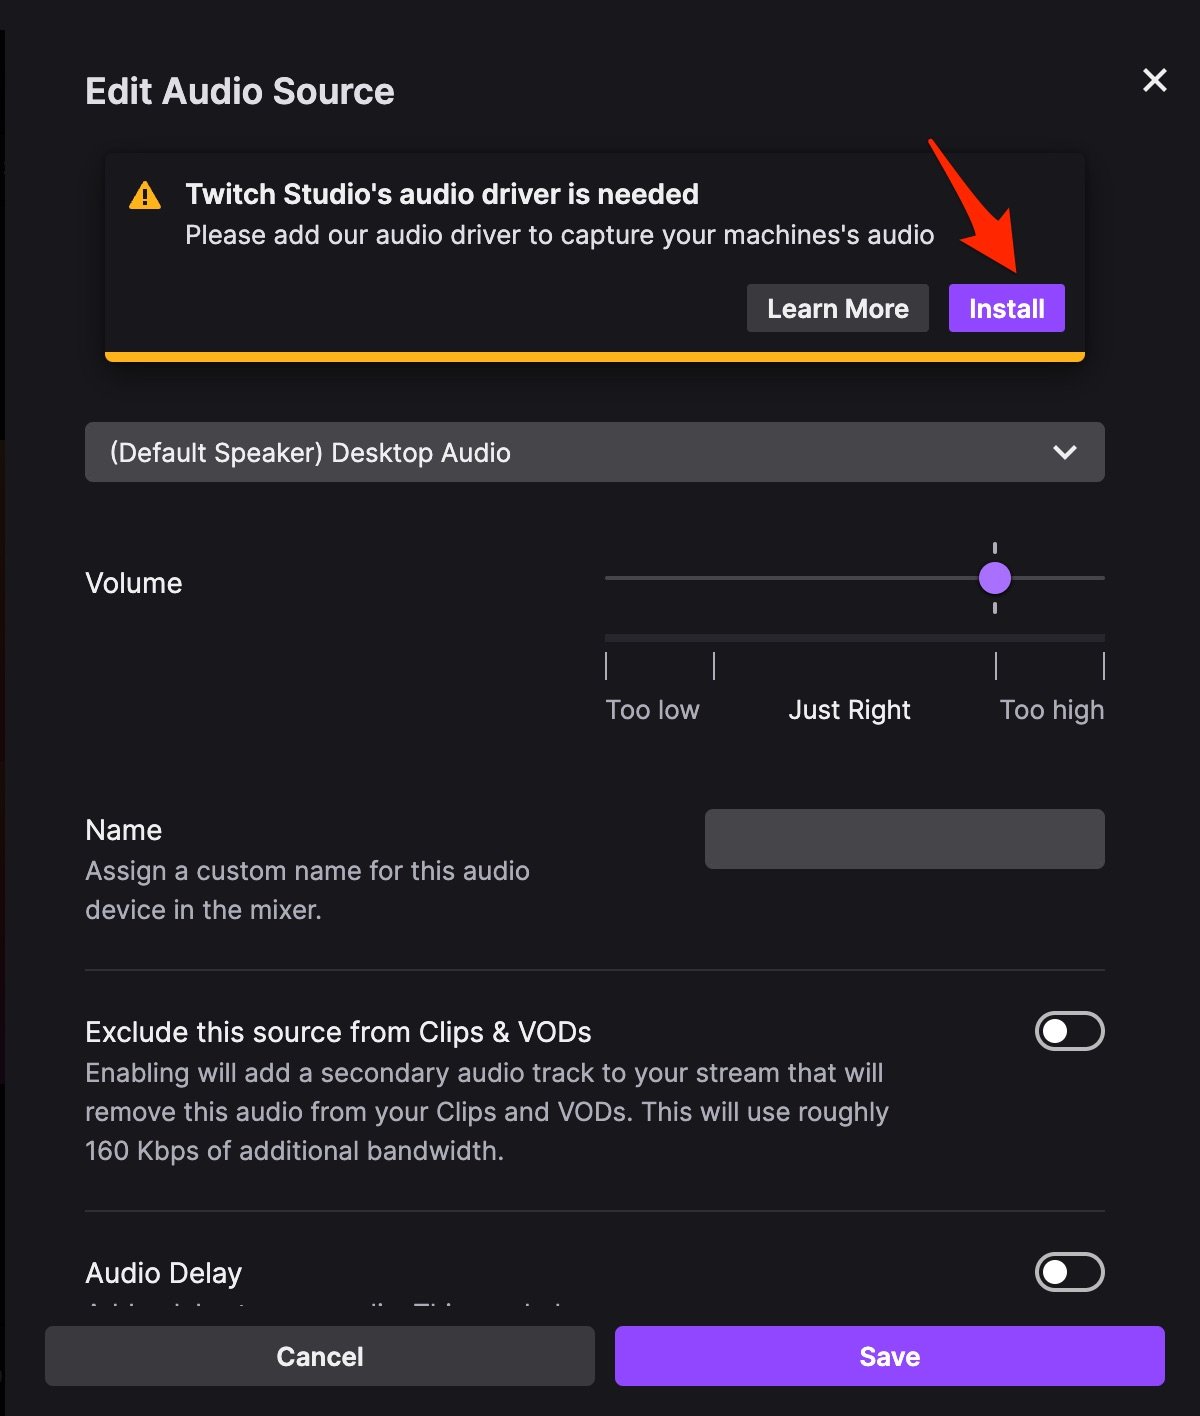 Install Twitch Audio Driver